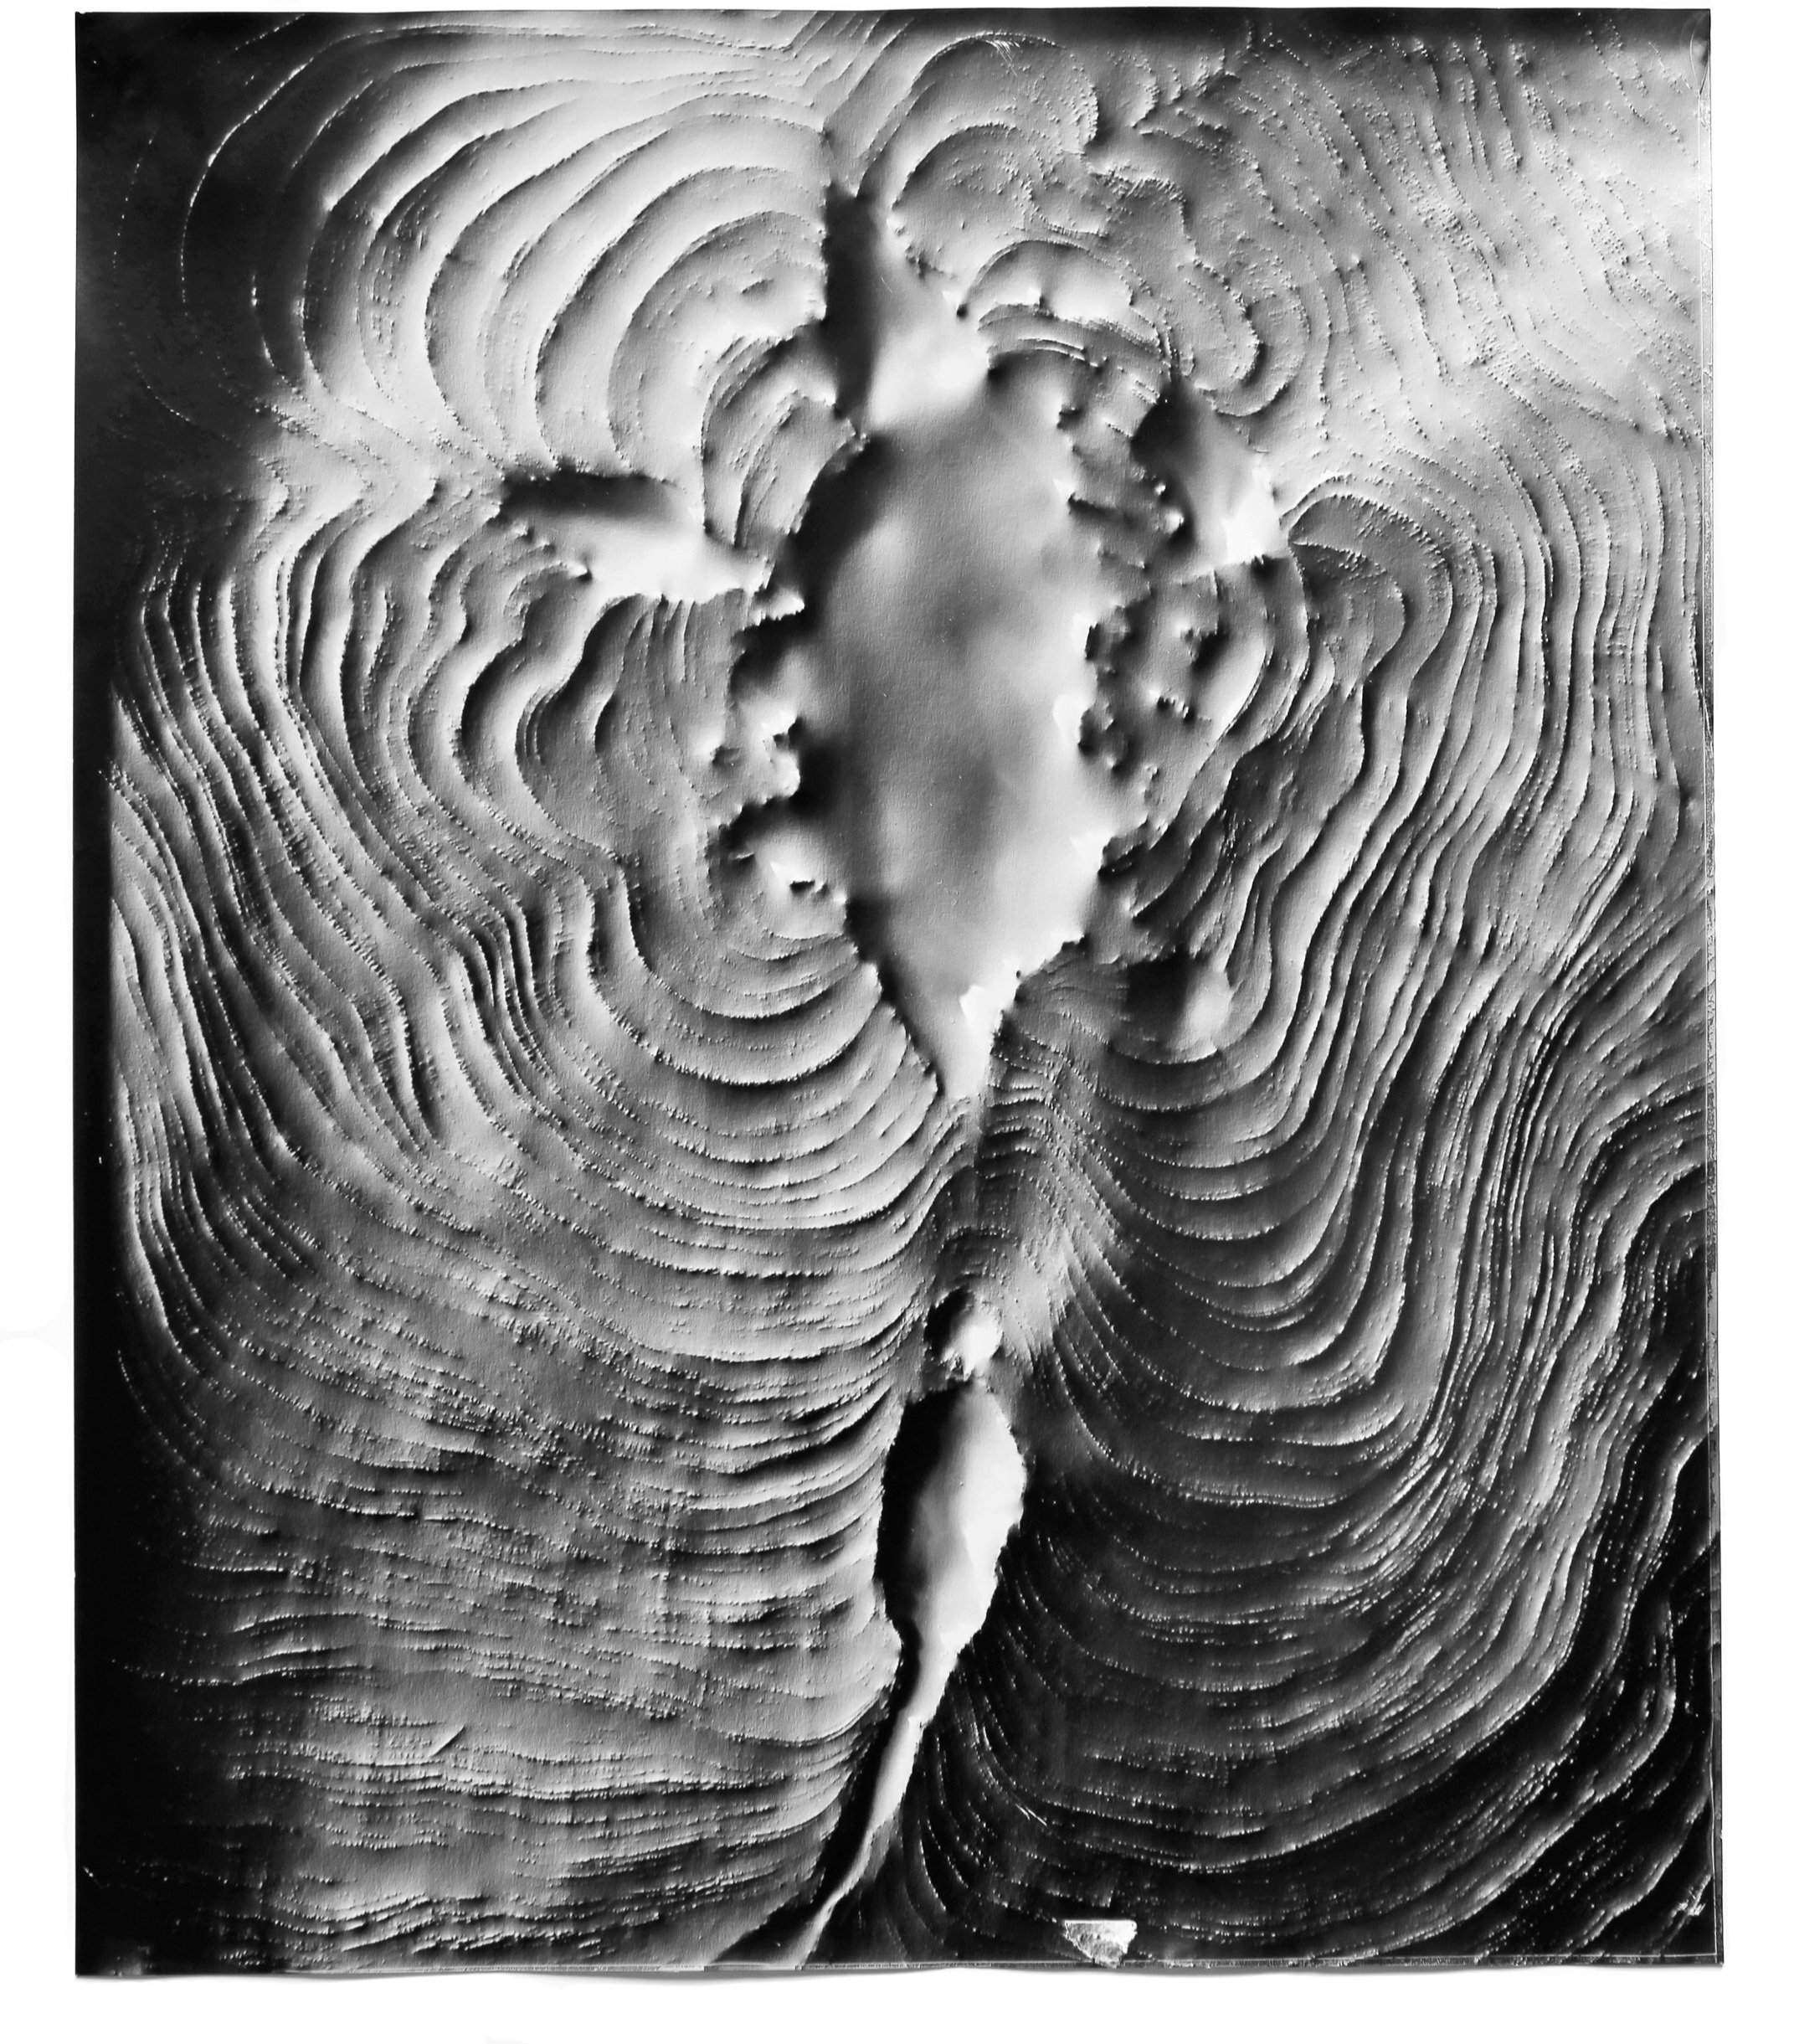   Automatic Earth 95,  2017 Photographic rubbing (embossed silver gelatin photogram) 24 x 20 in 